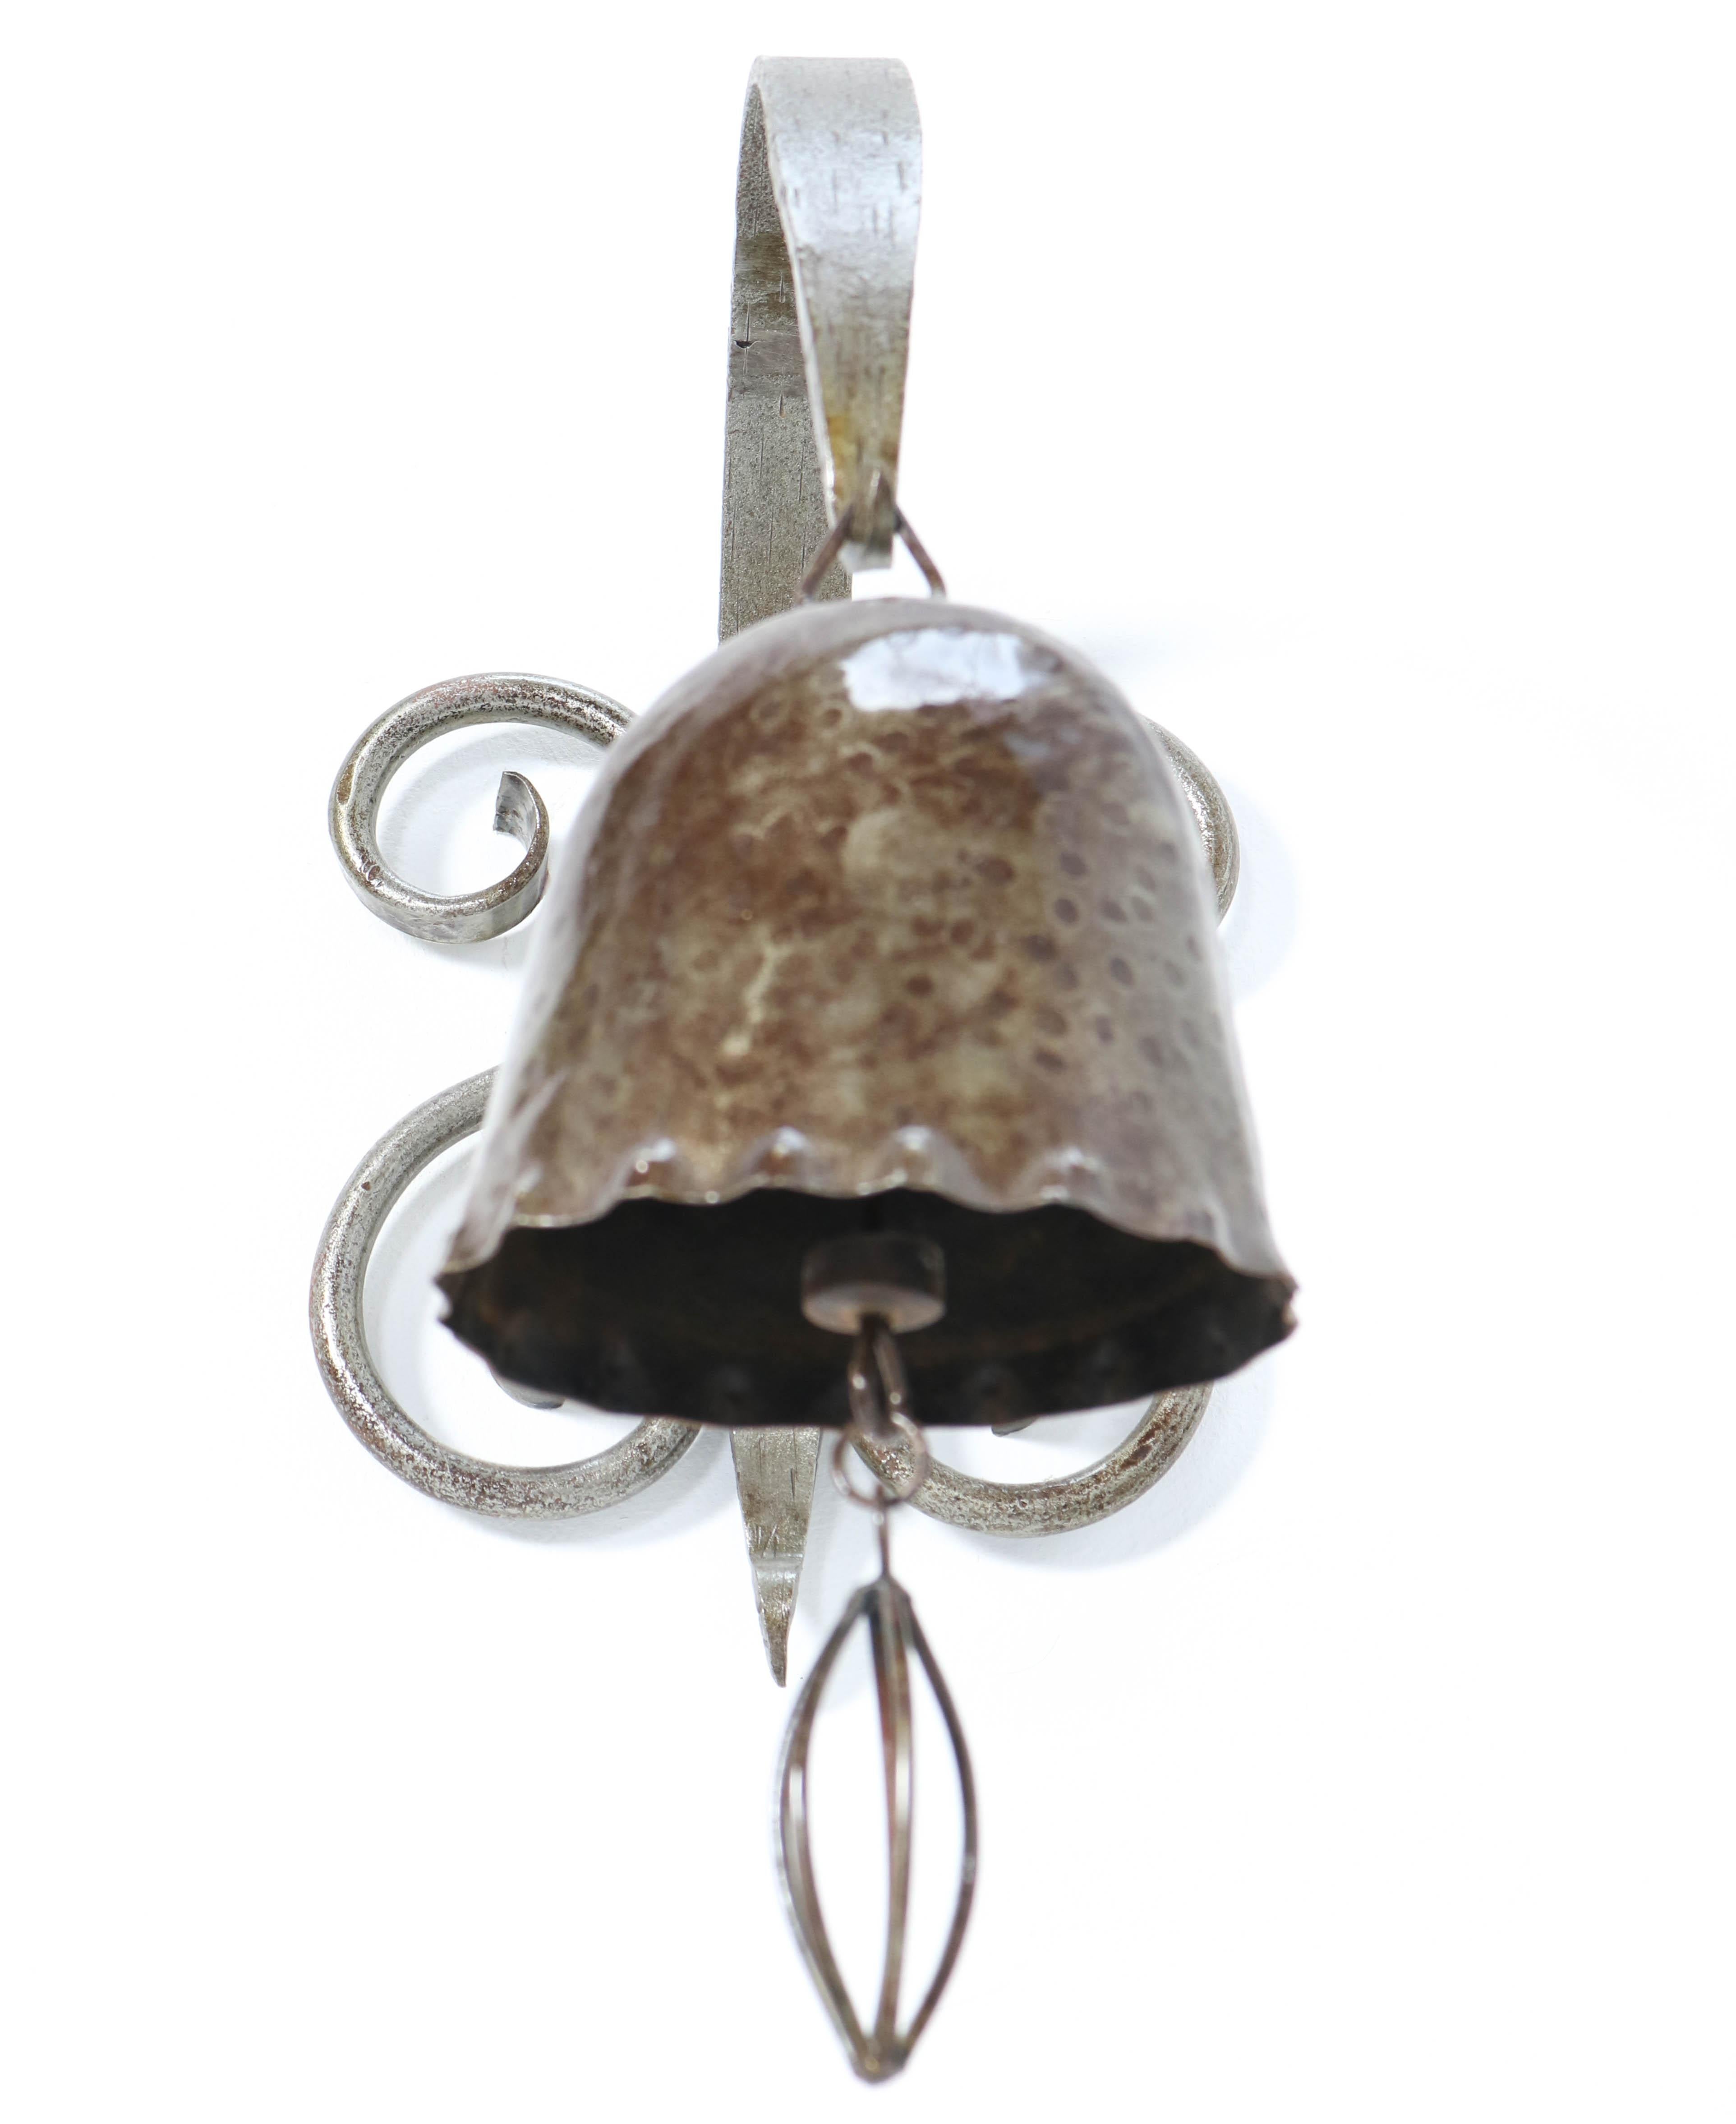 Patinated Wrought Iron Art Deco Amsterdam School Gong or Bell, 1930s For Sale 1